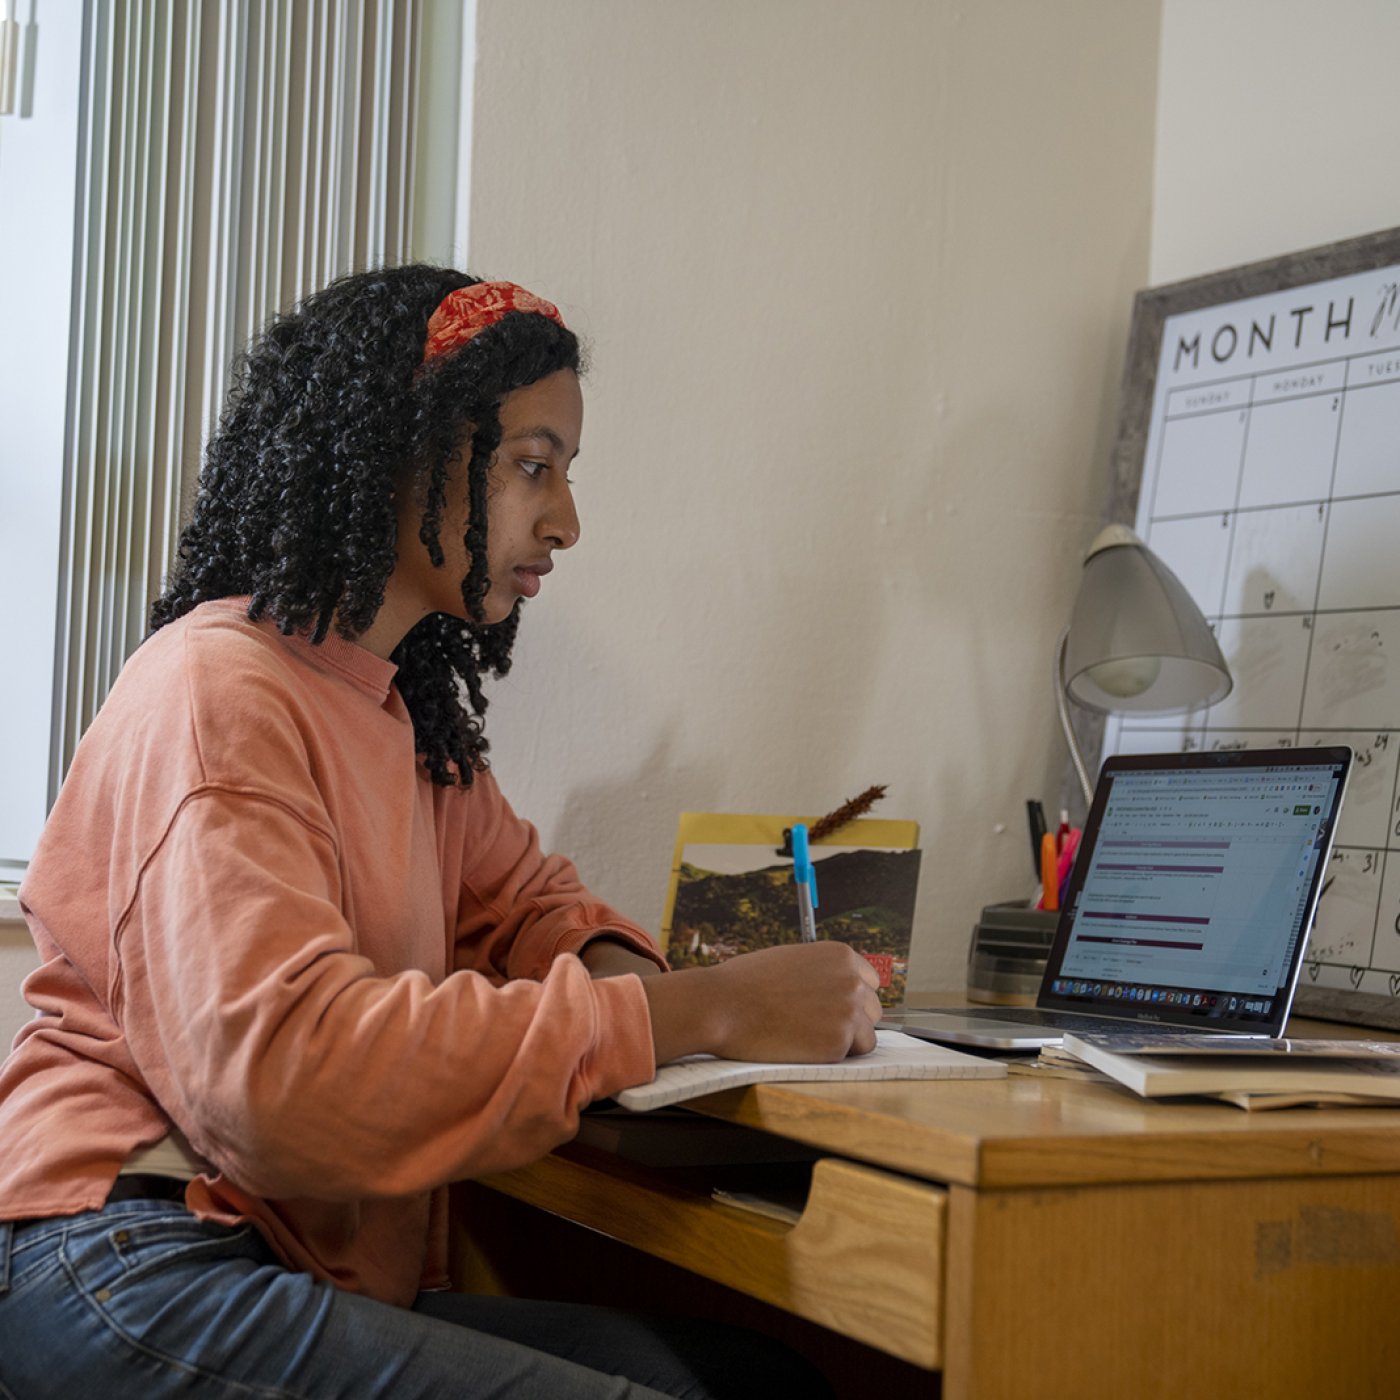 Student studying in the residence hall